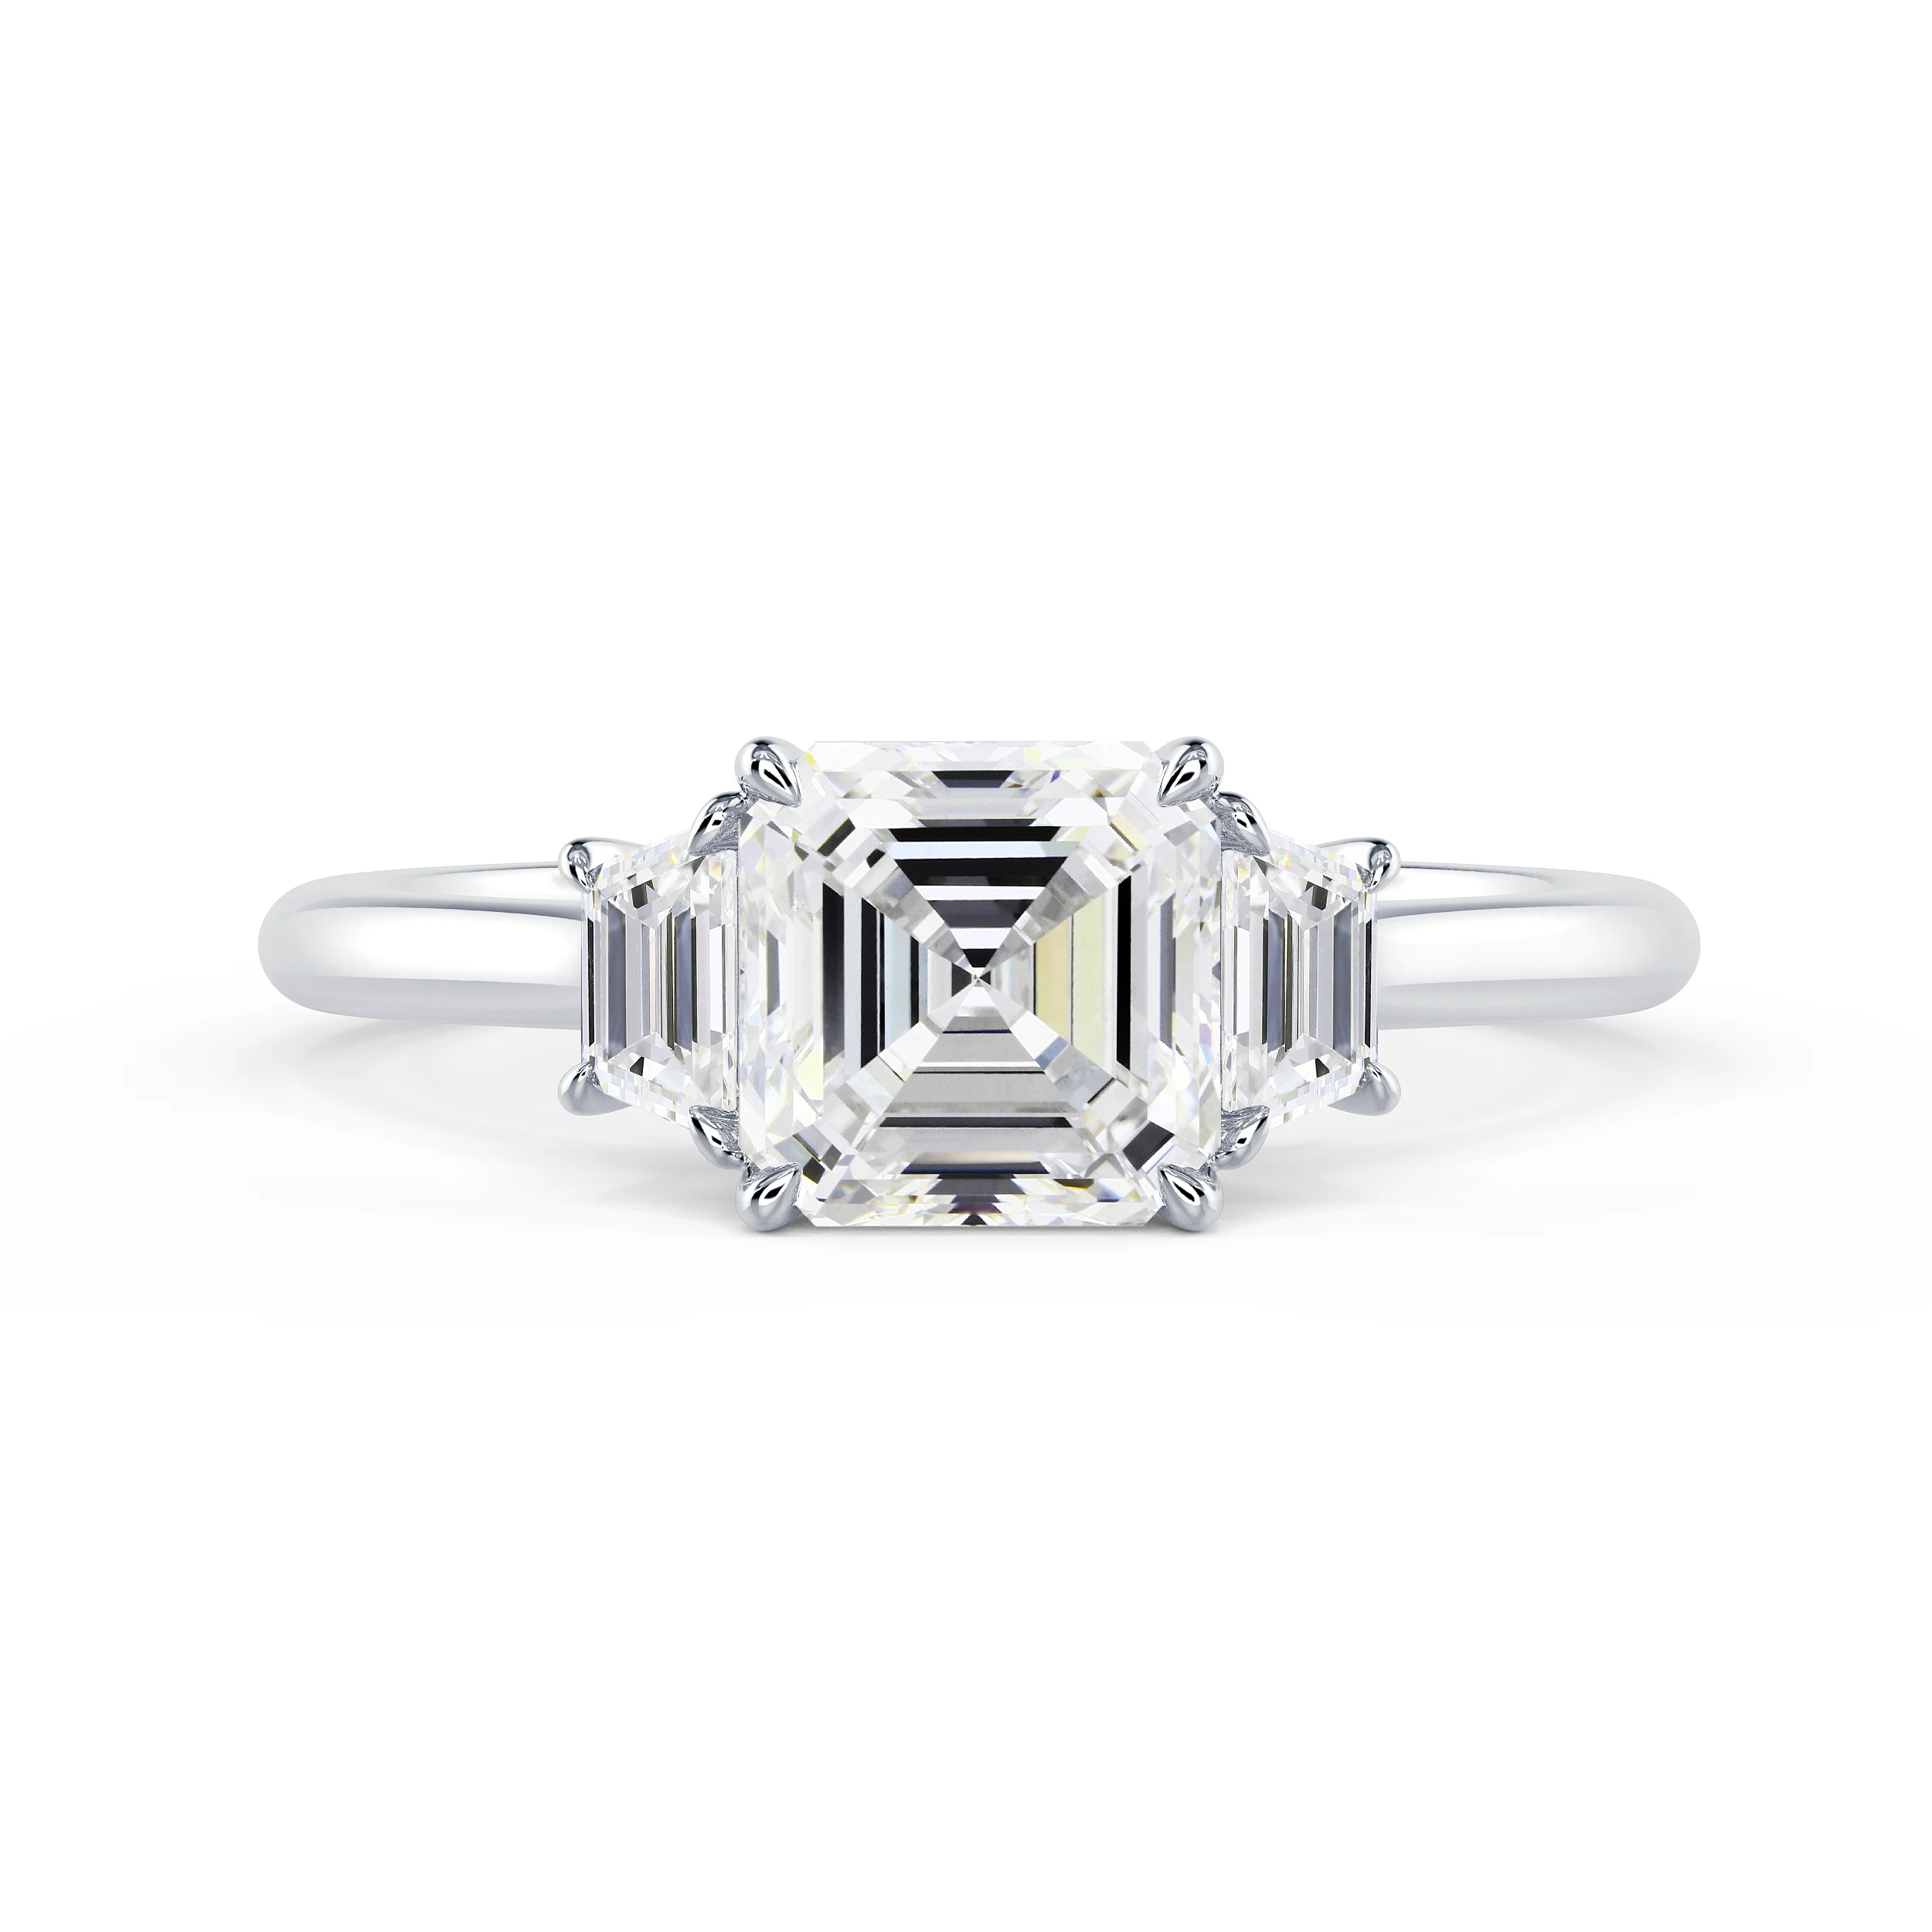 White Gold Asscher and Trapezoid Setting featuring Diamonds (Main View)